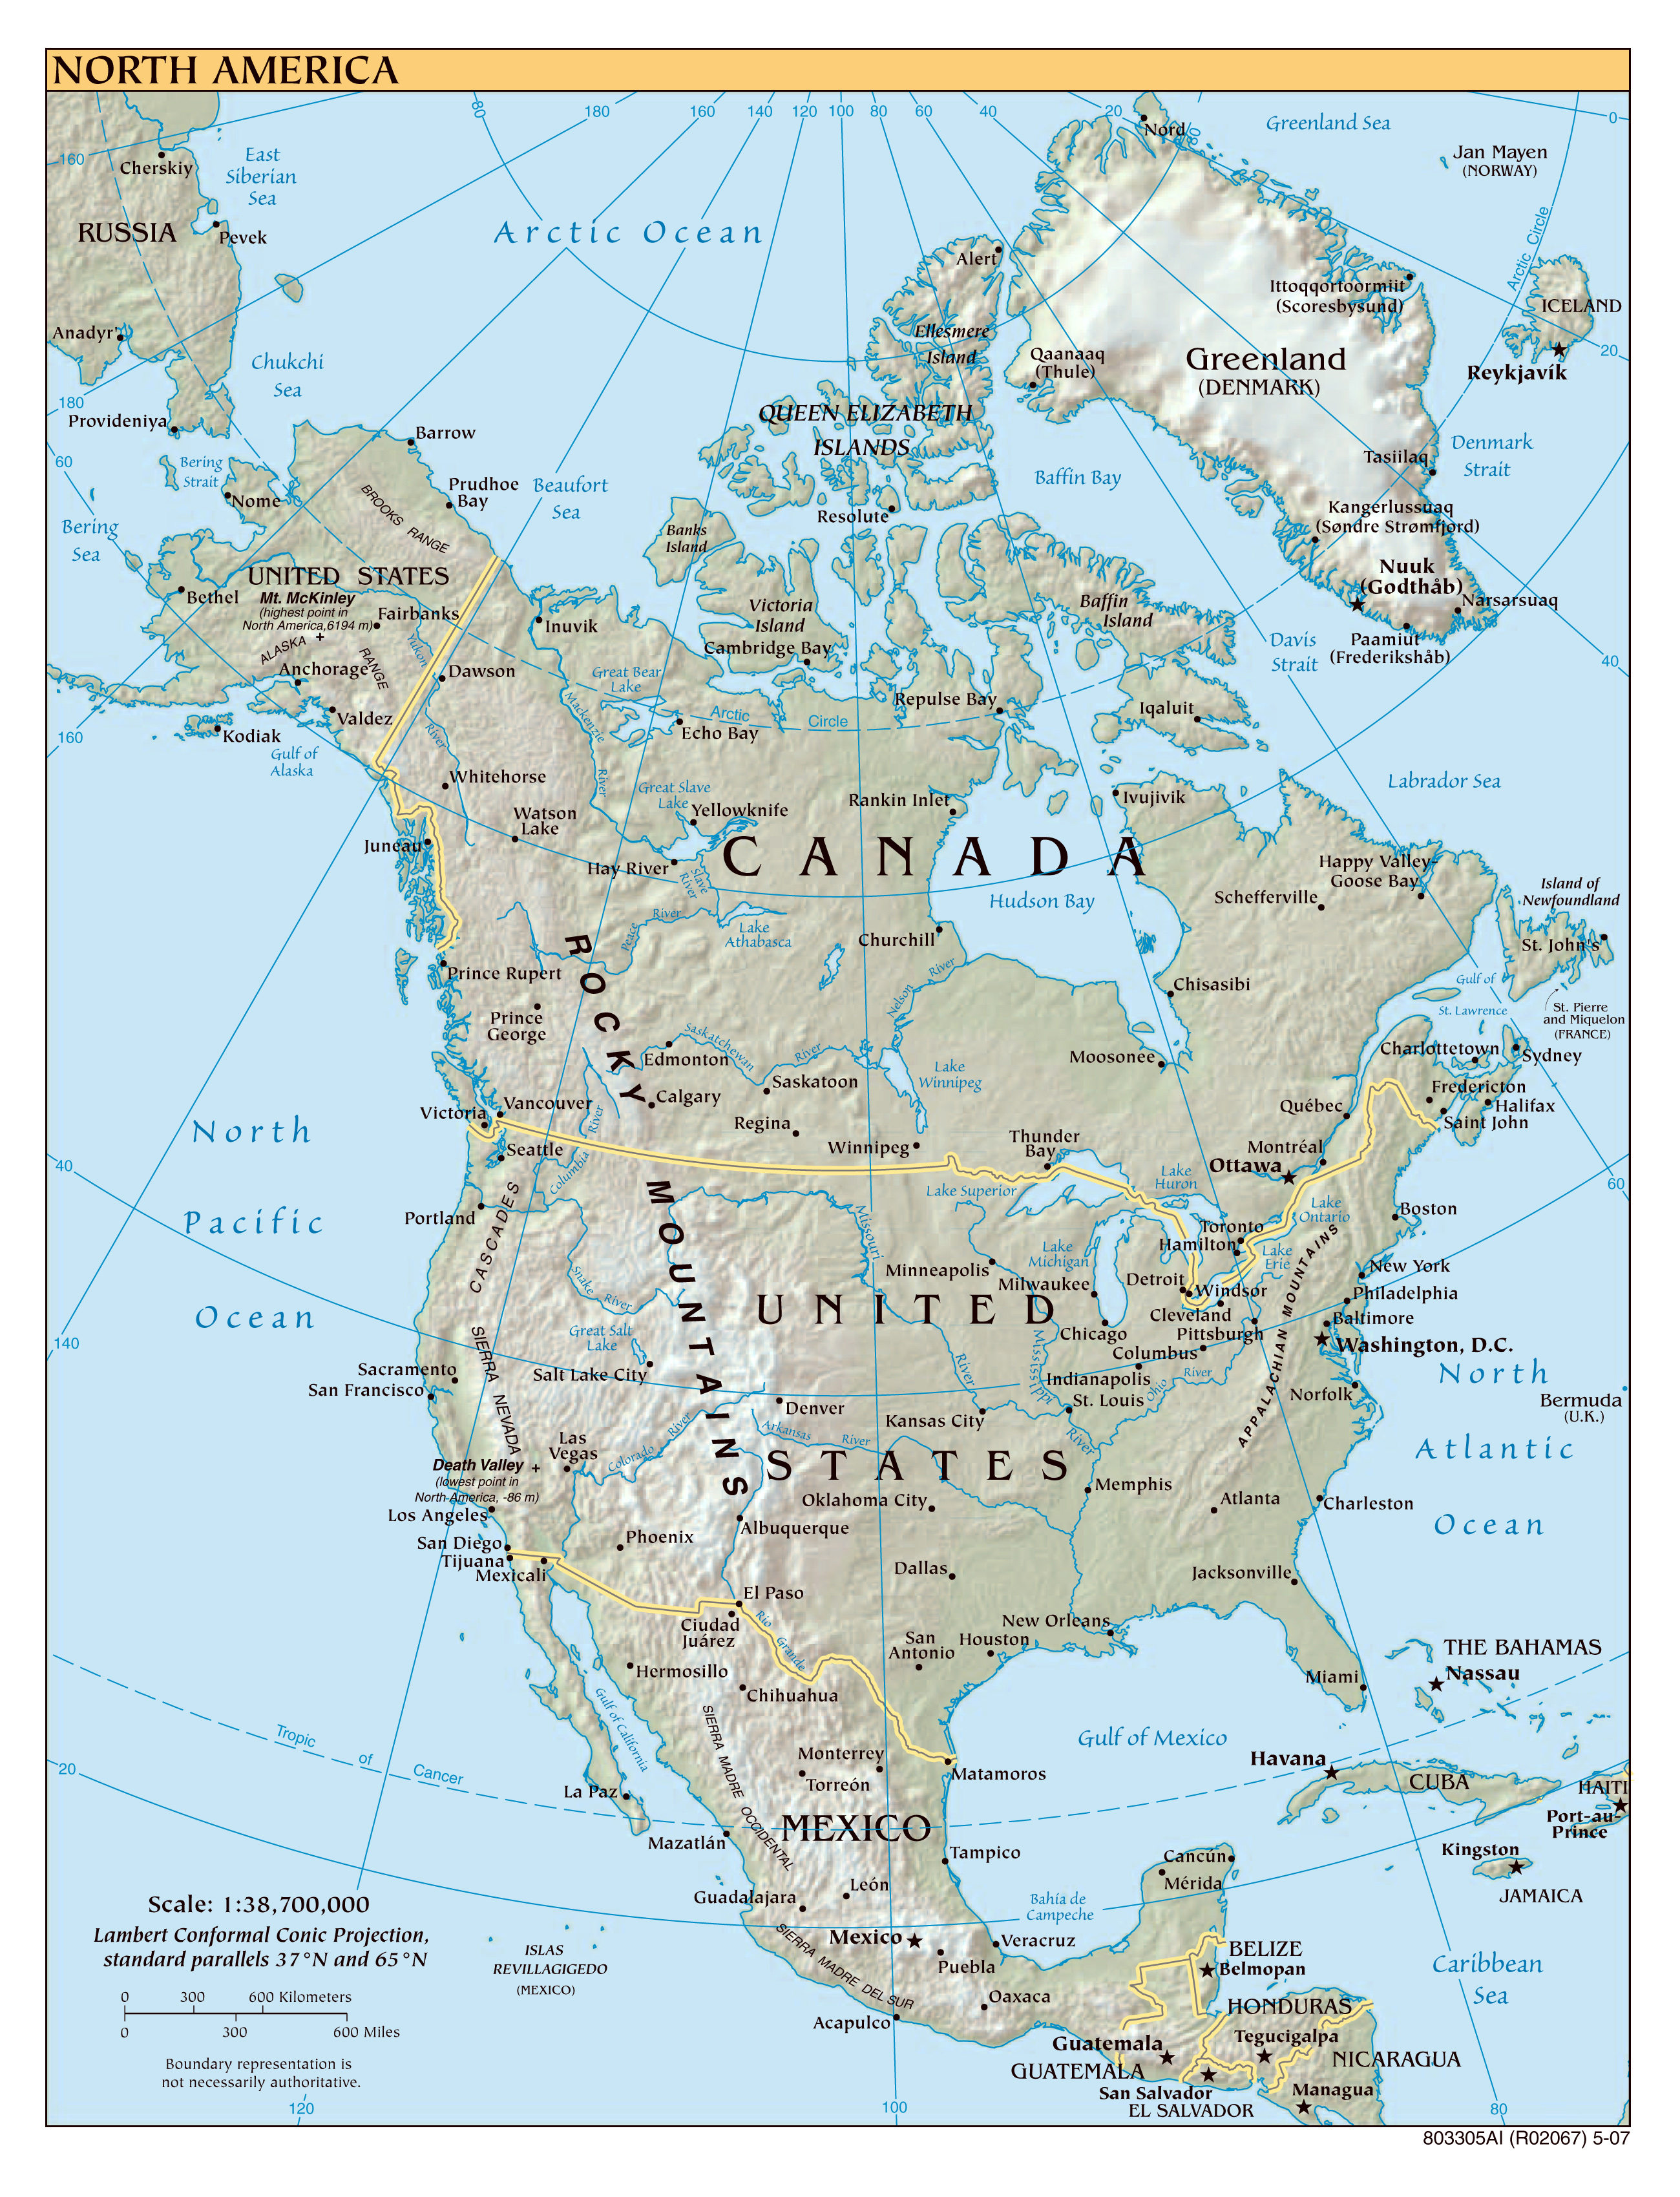 north-america-large-detailed-political-map-with-relief-all-capitals-and-major-cities-vidiani